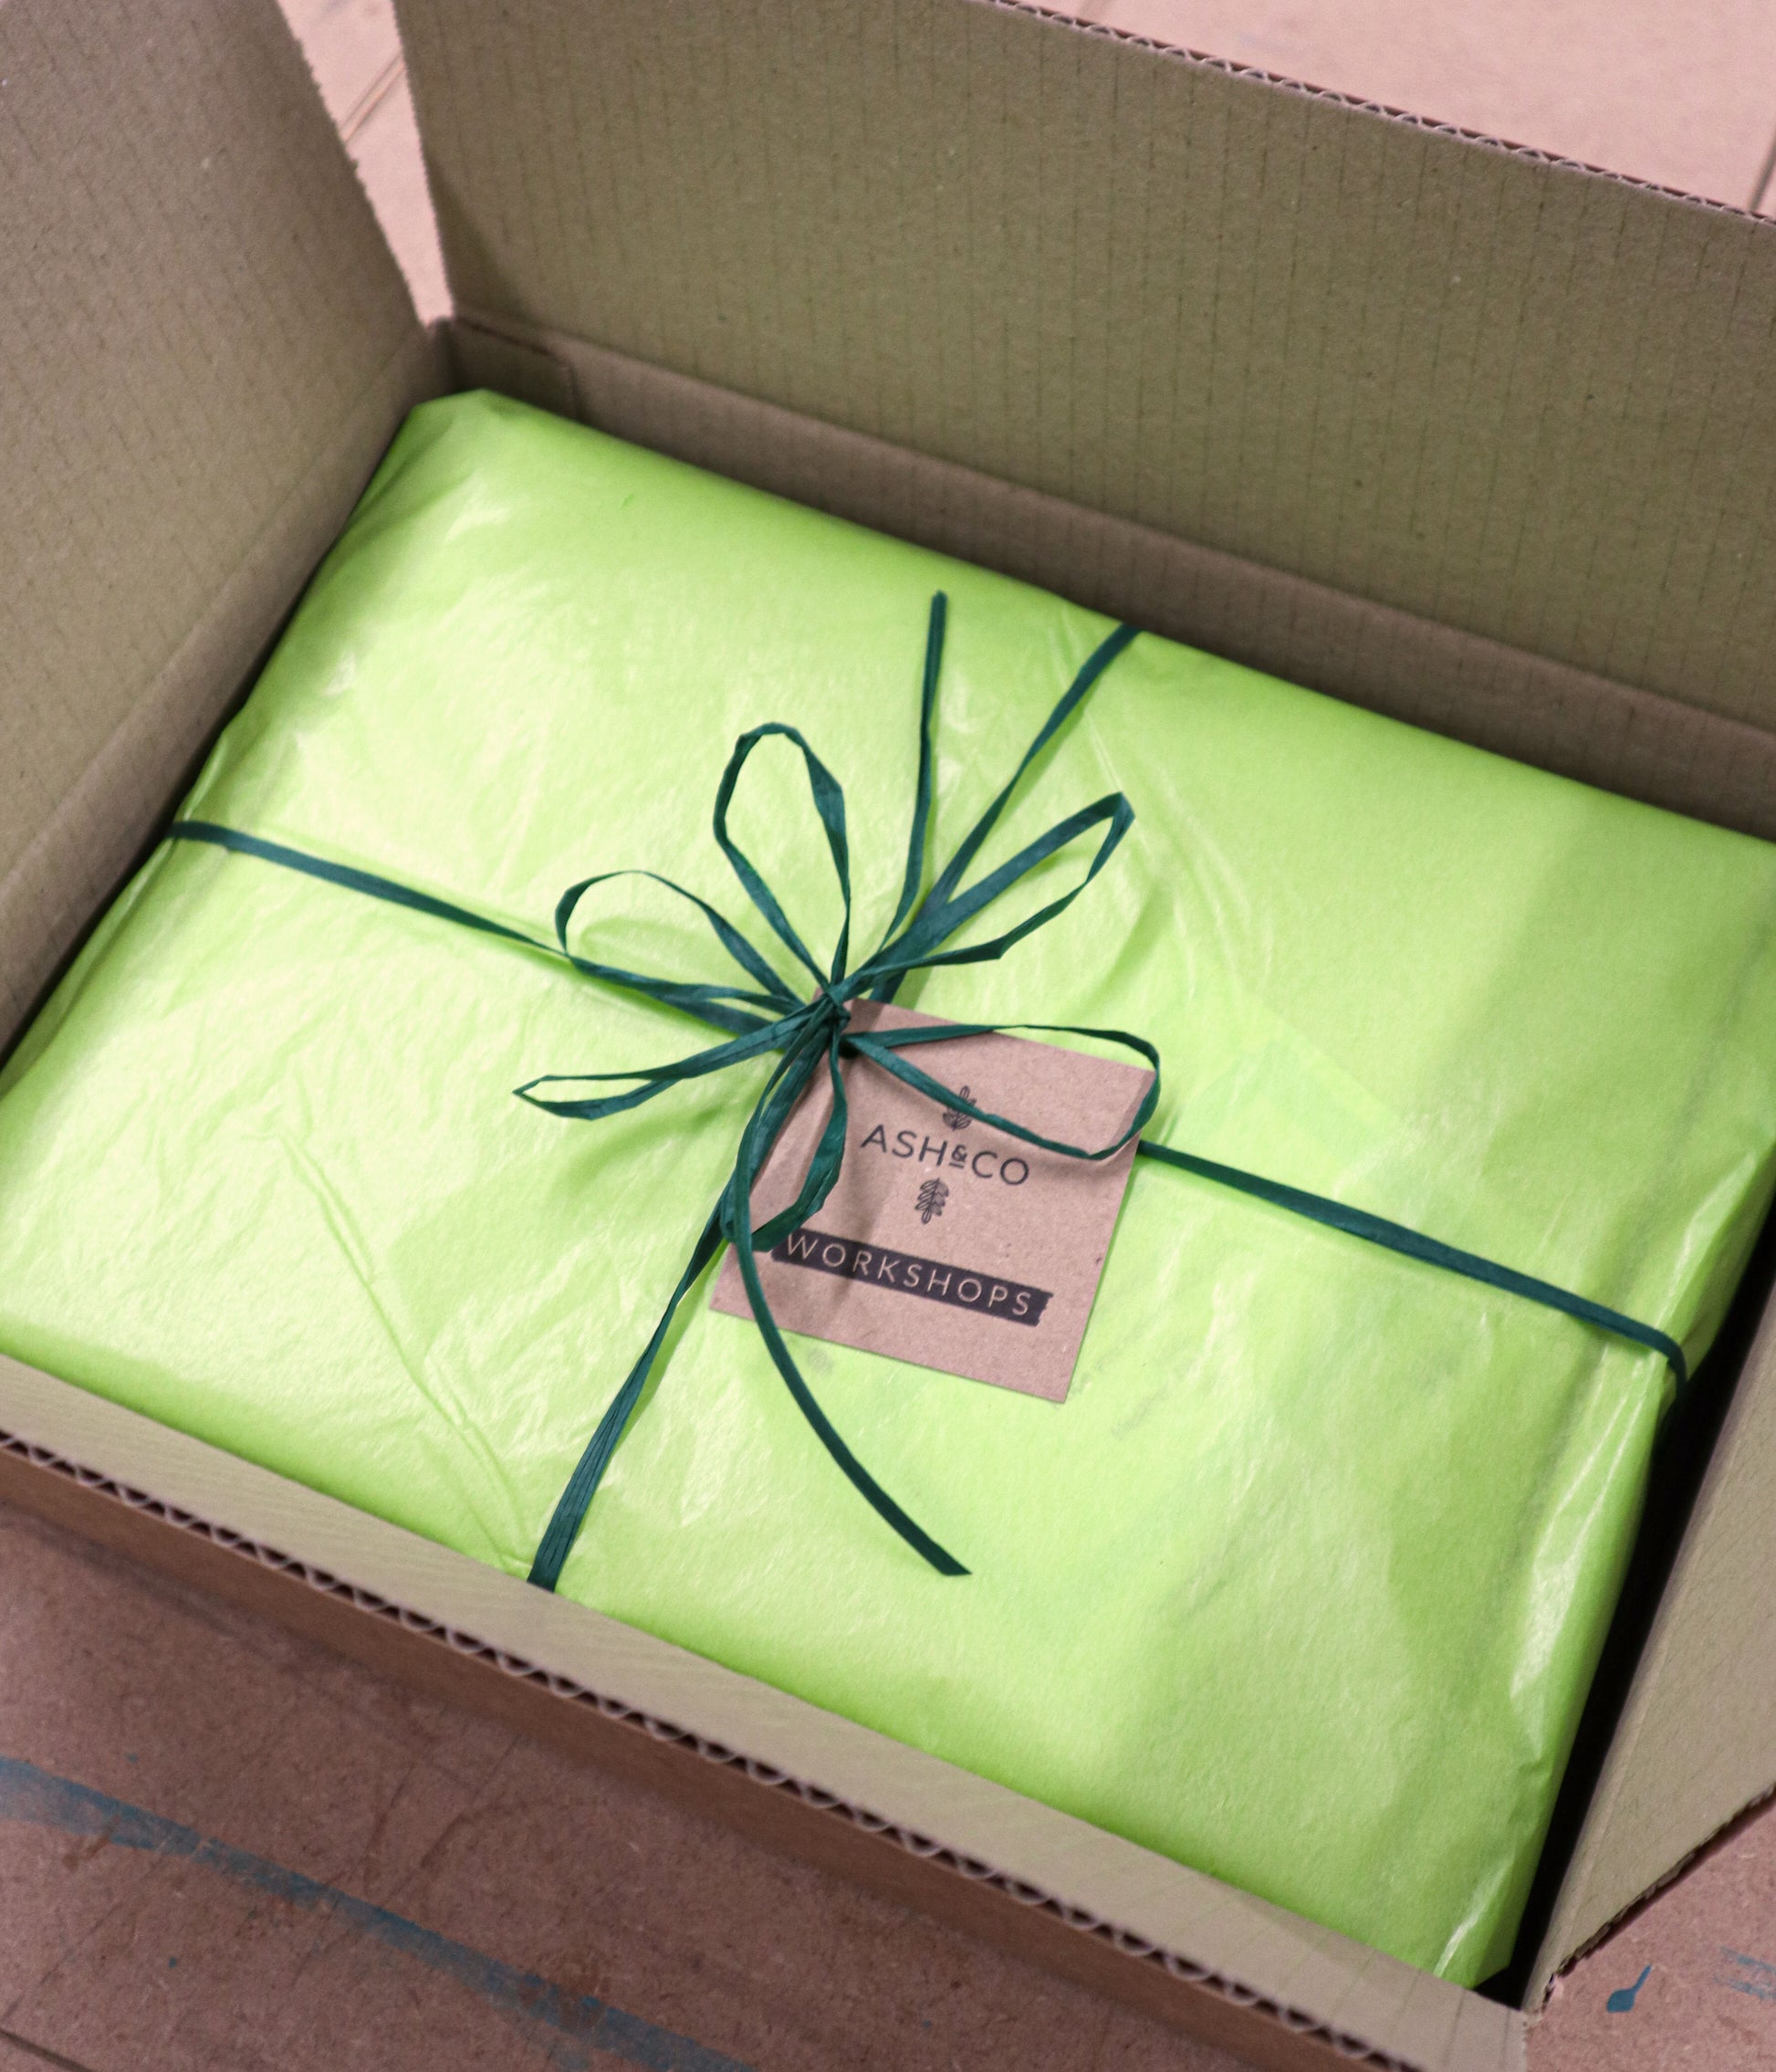 Gift wrapping service available from Ash & Co. Workshops for all Mini-Maker, woodworking and tool kits